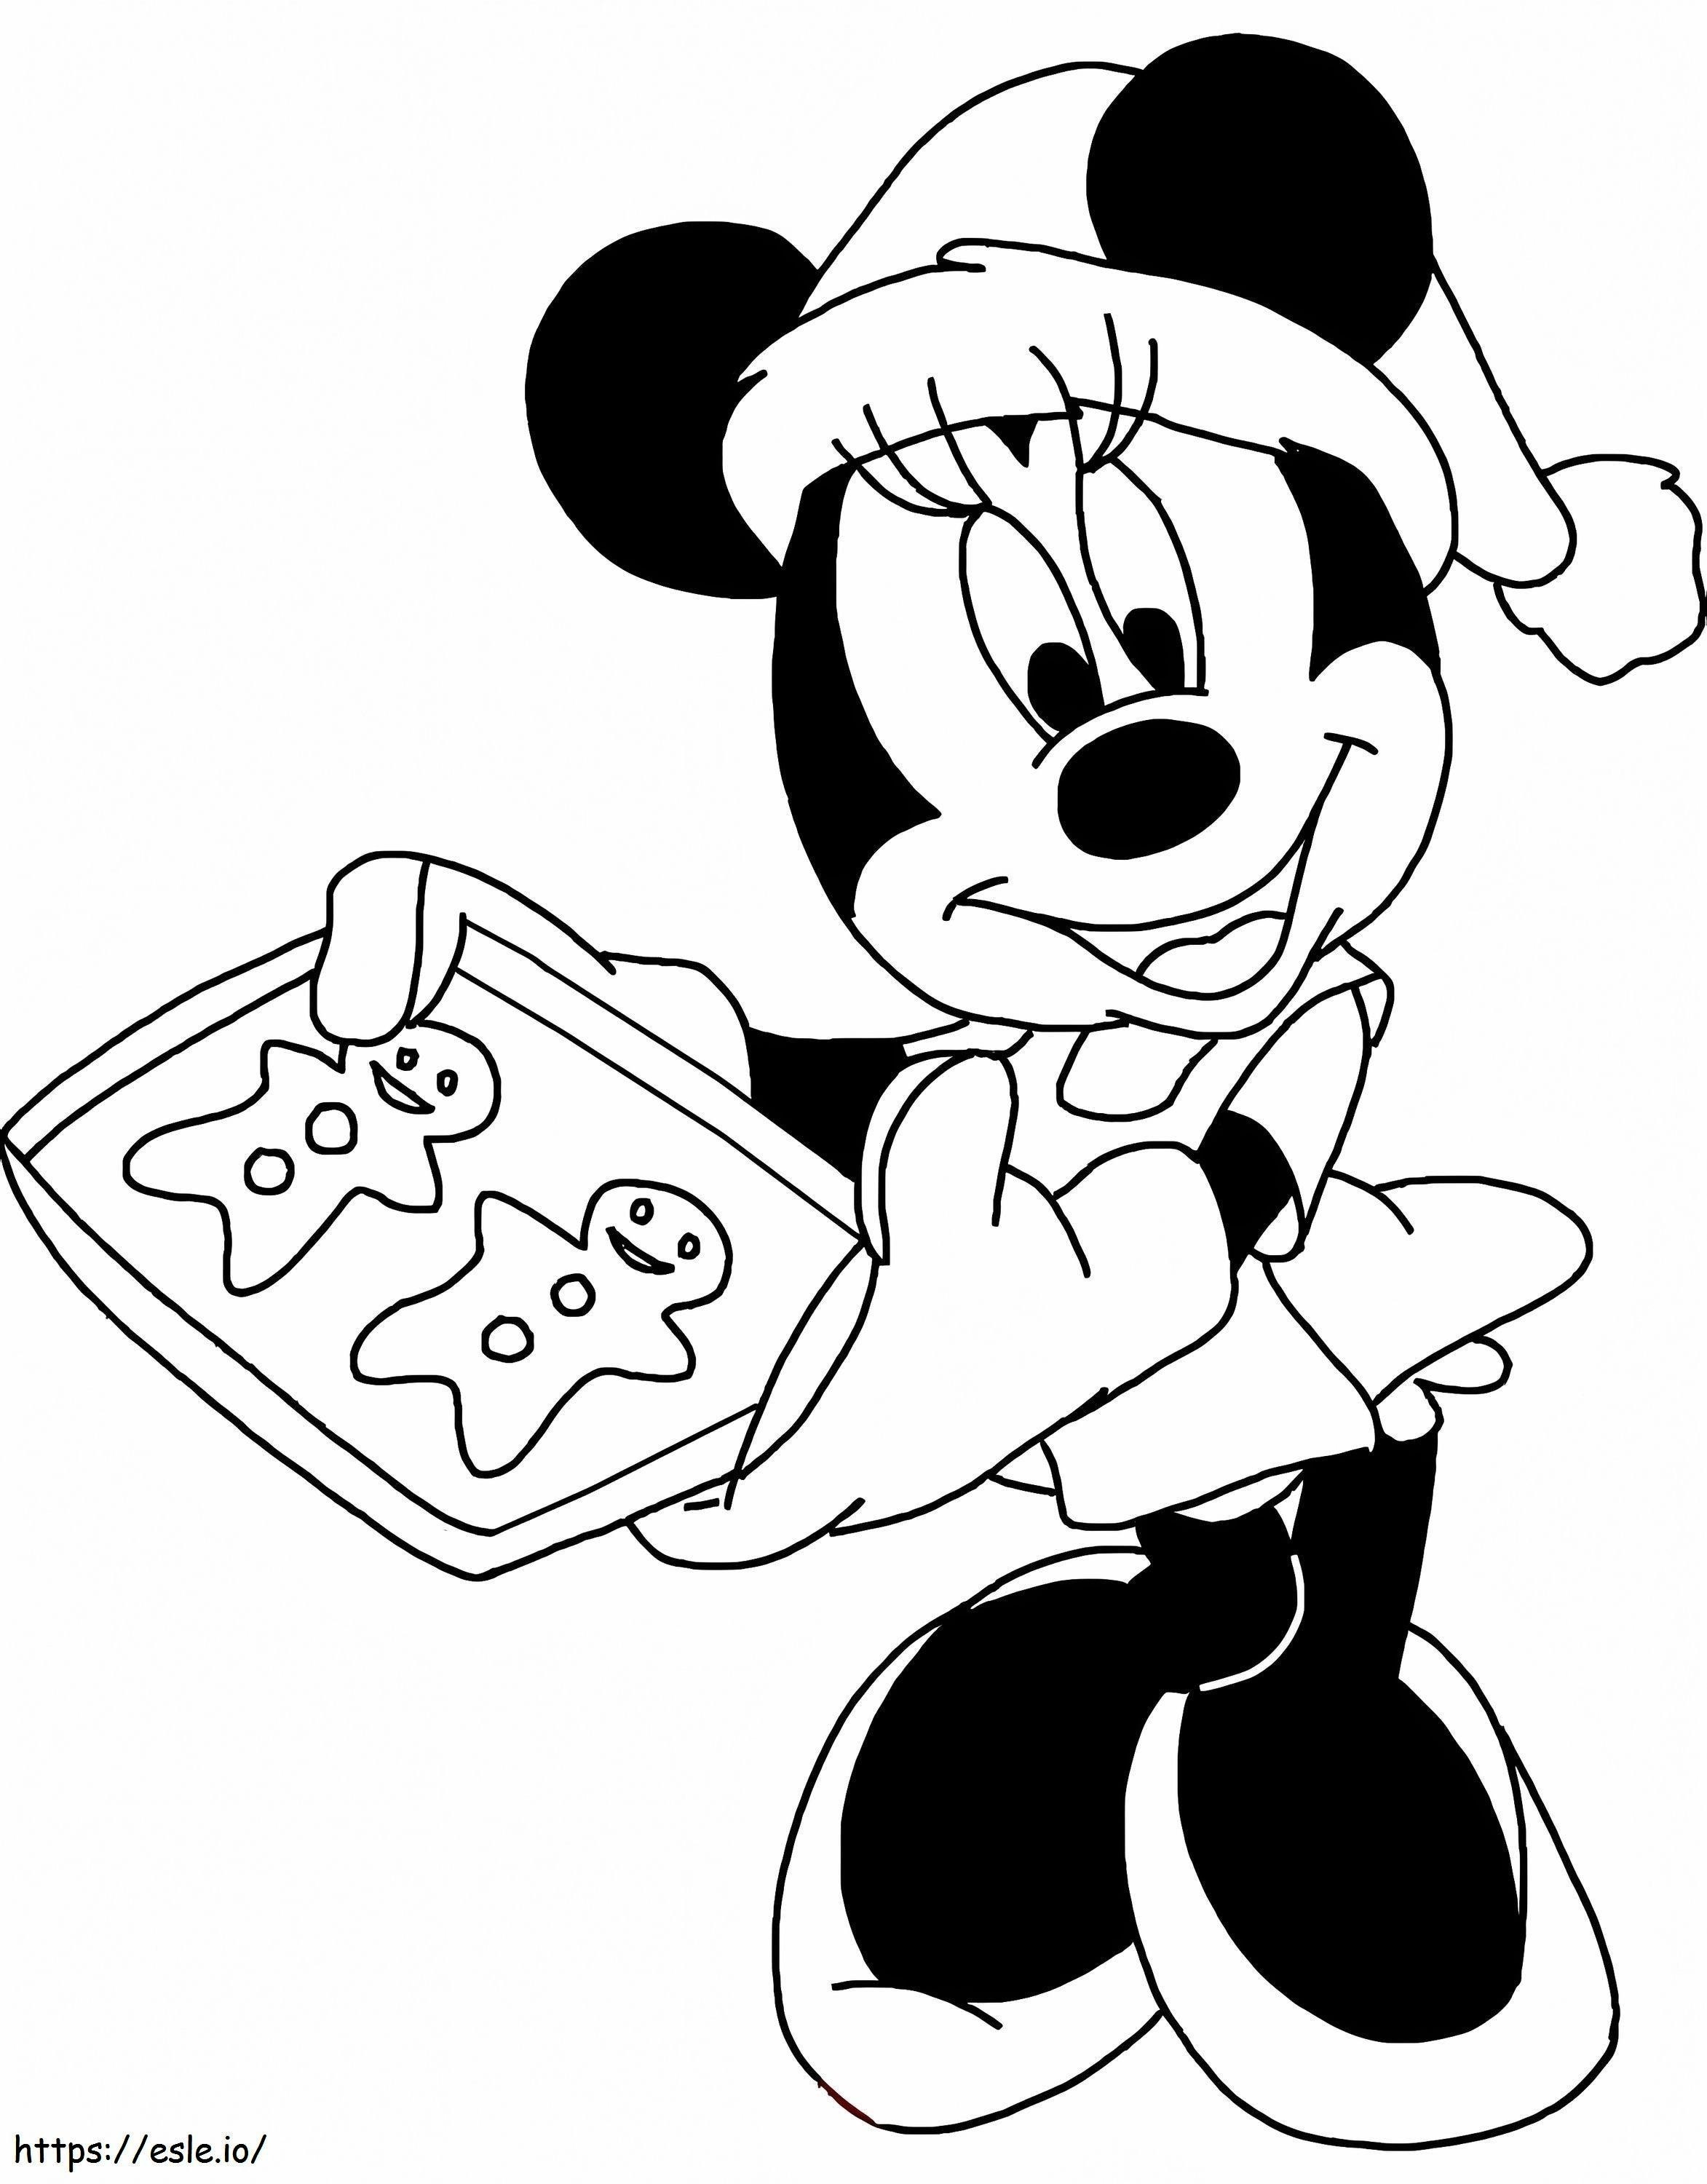 Minnie Mouse Disney Christmas coloring page